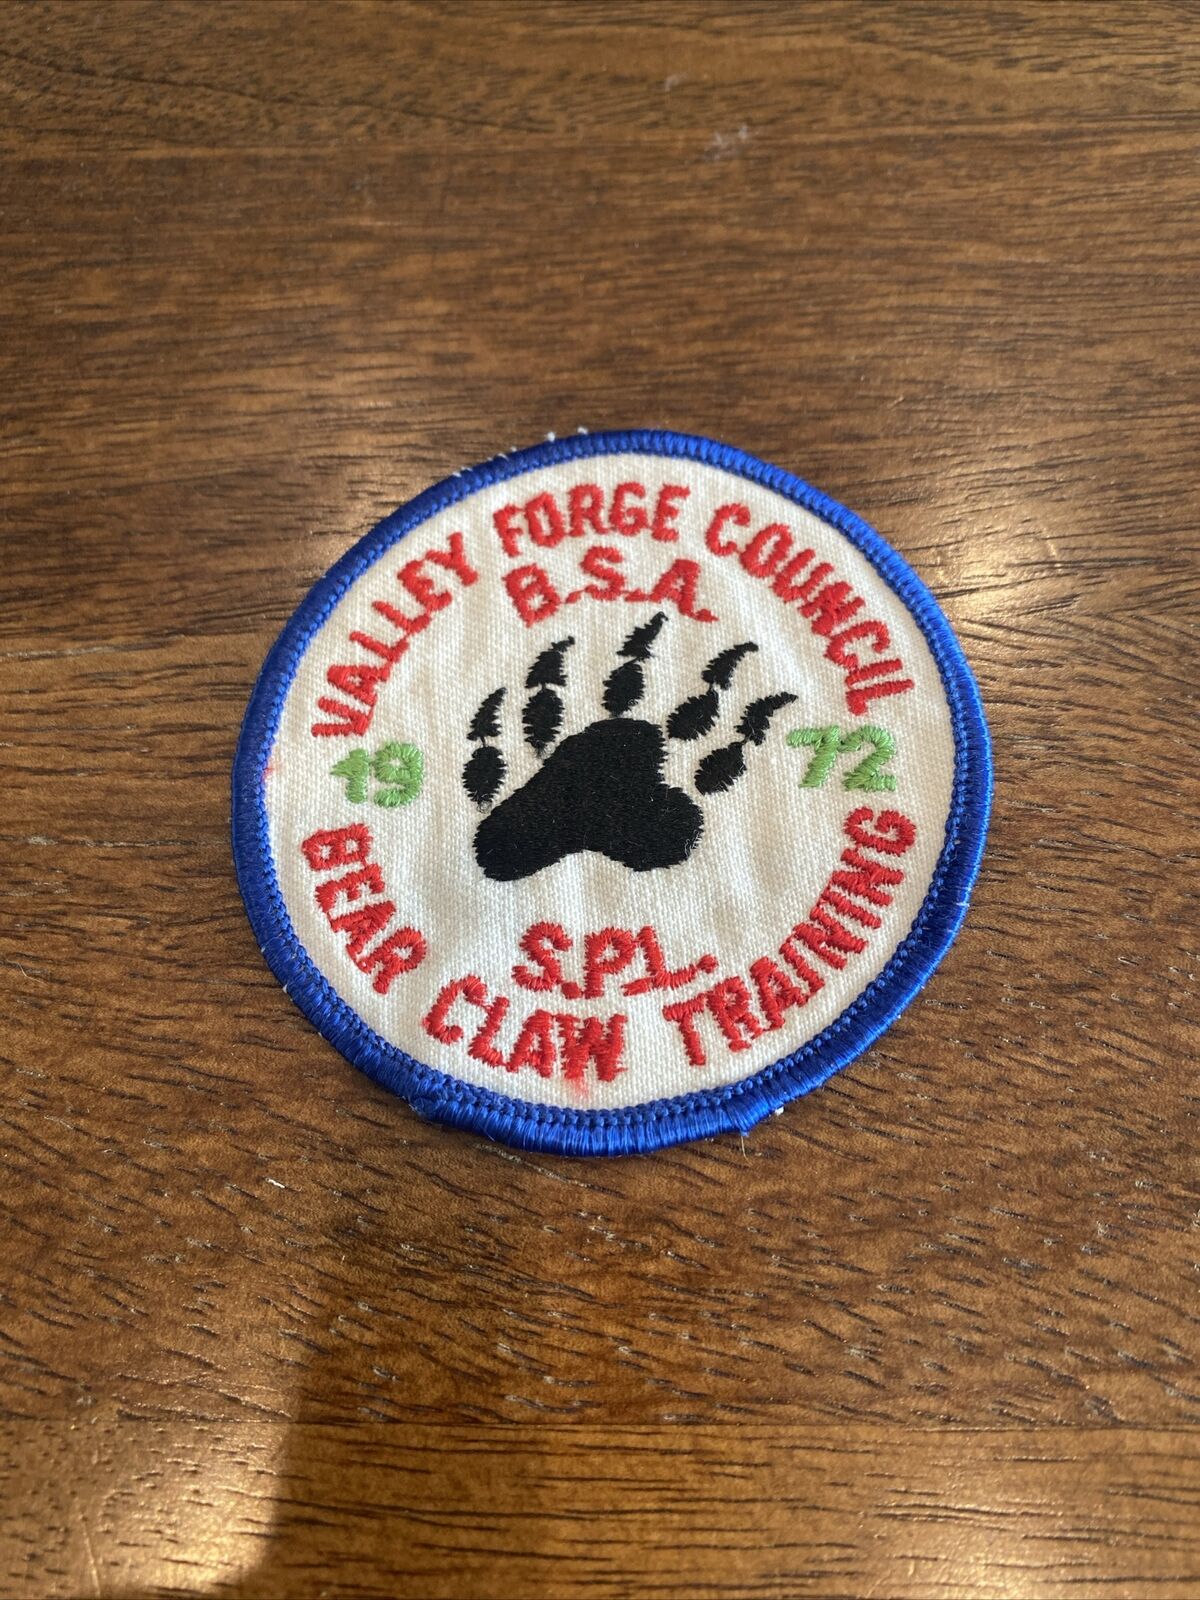 1972 Valley Forge Council Patch Bear Claw Training SPL